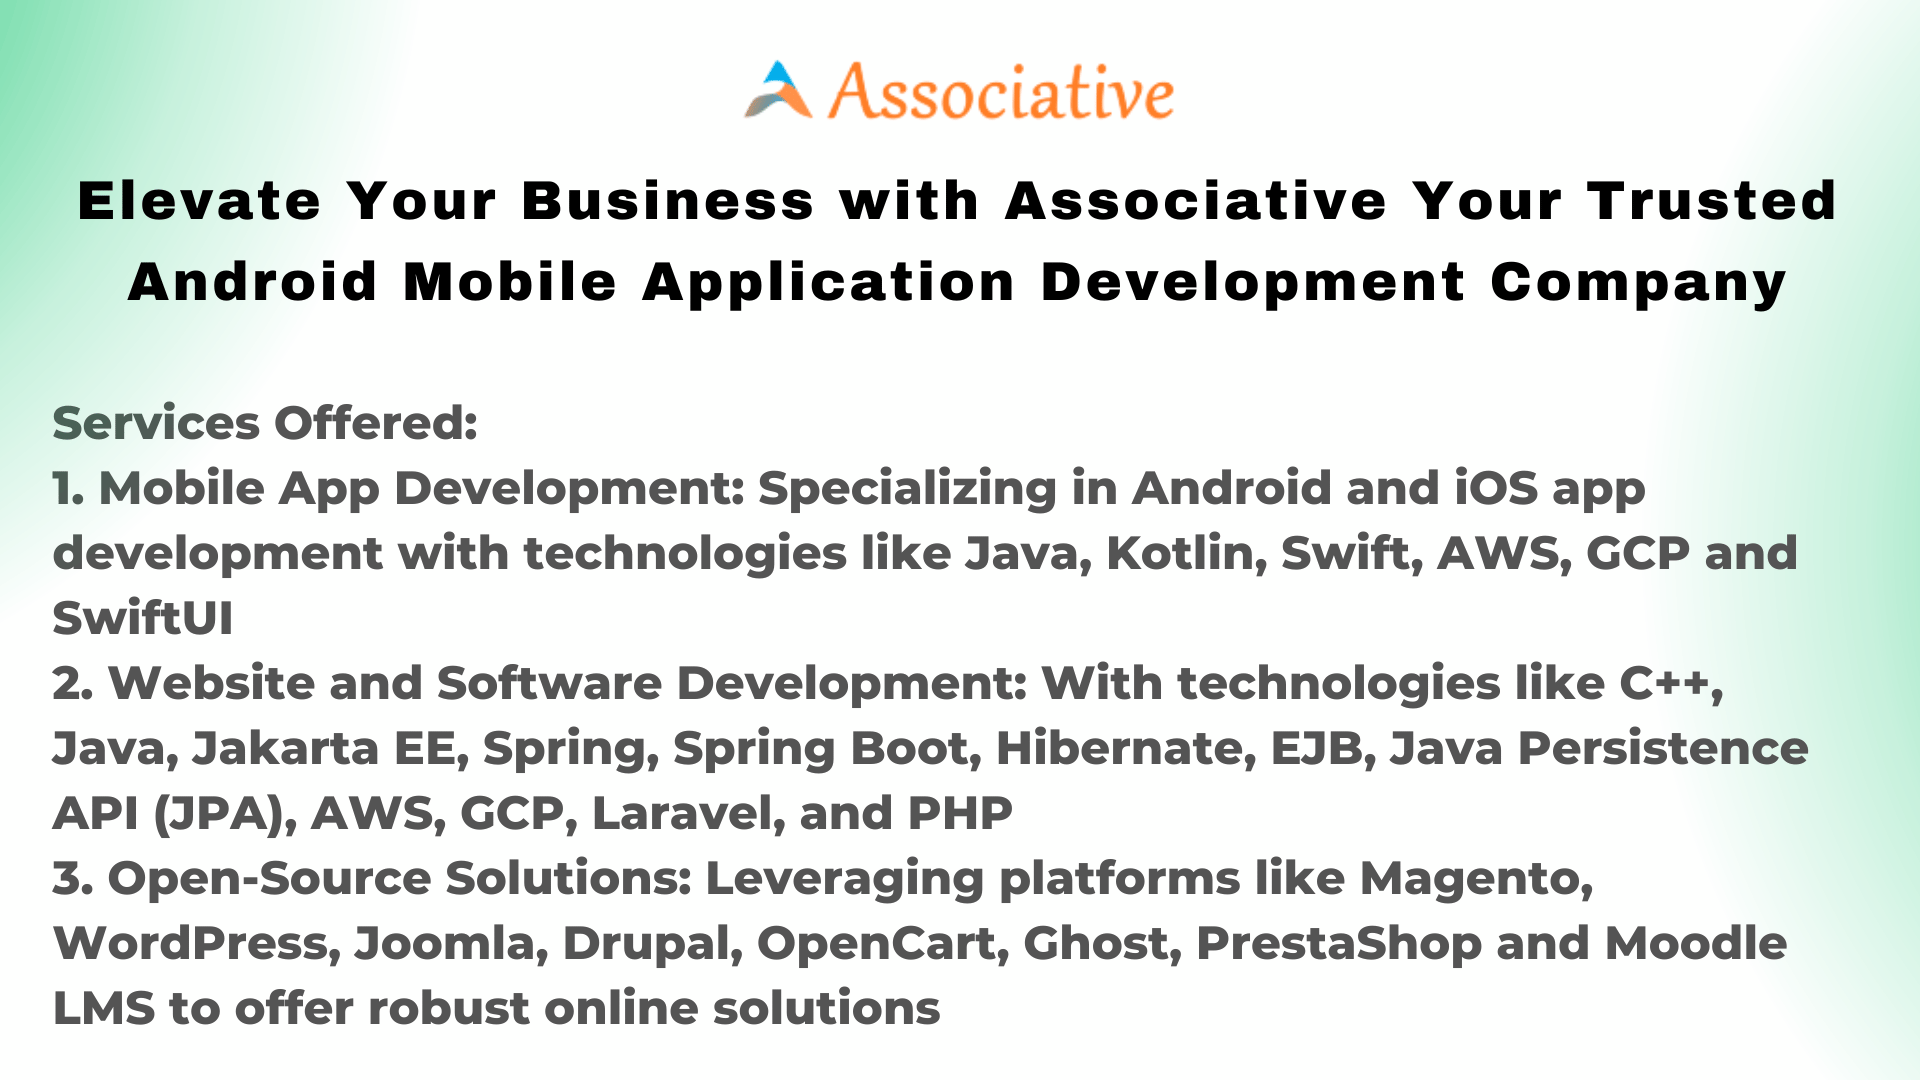 Elevate Your Business with Associative Your Trusted Android Mobile Application Development Company